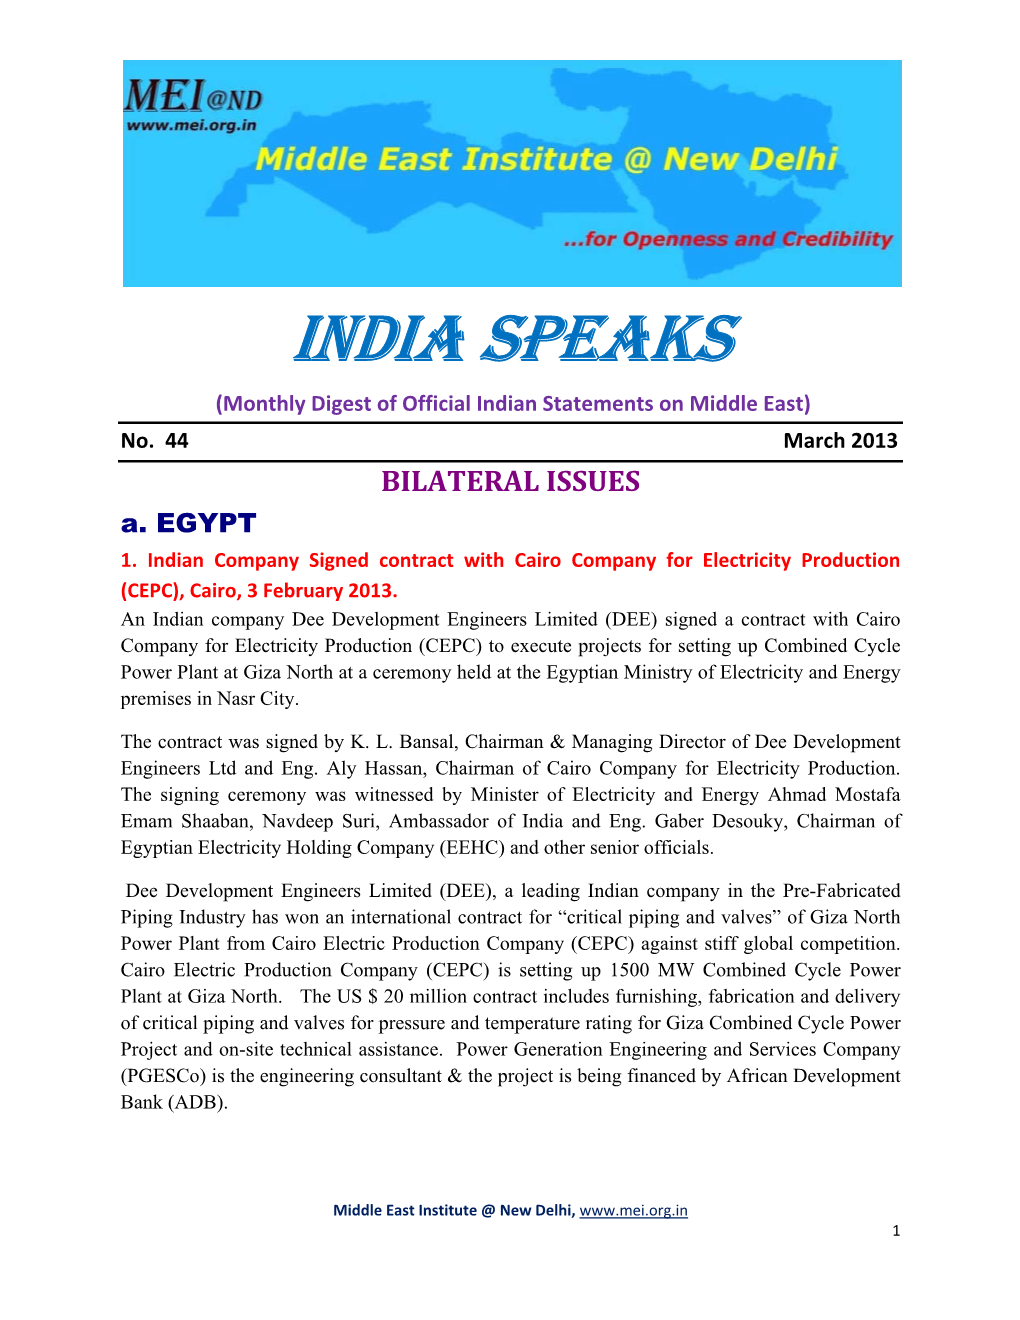 INDIA SPEAKS (Monthly Digest of Official Indian Statements on Middle East) No